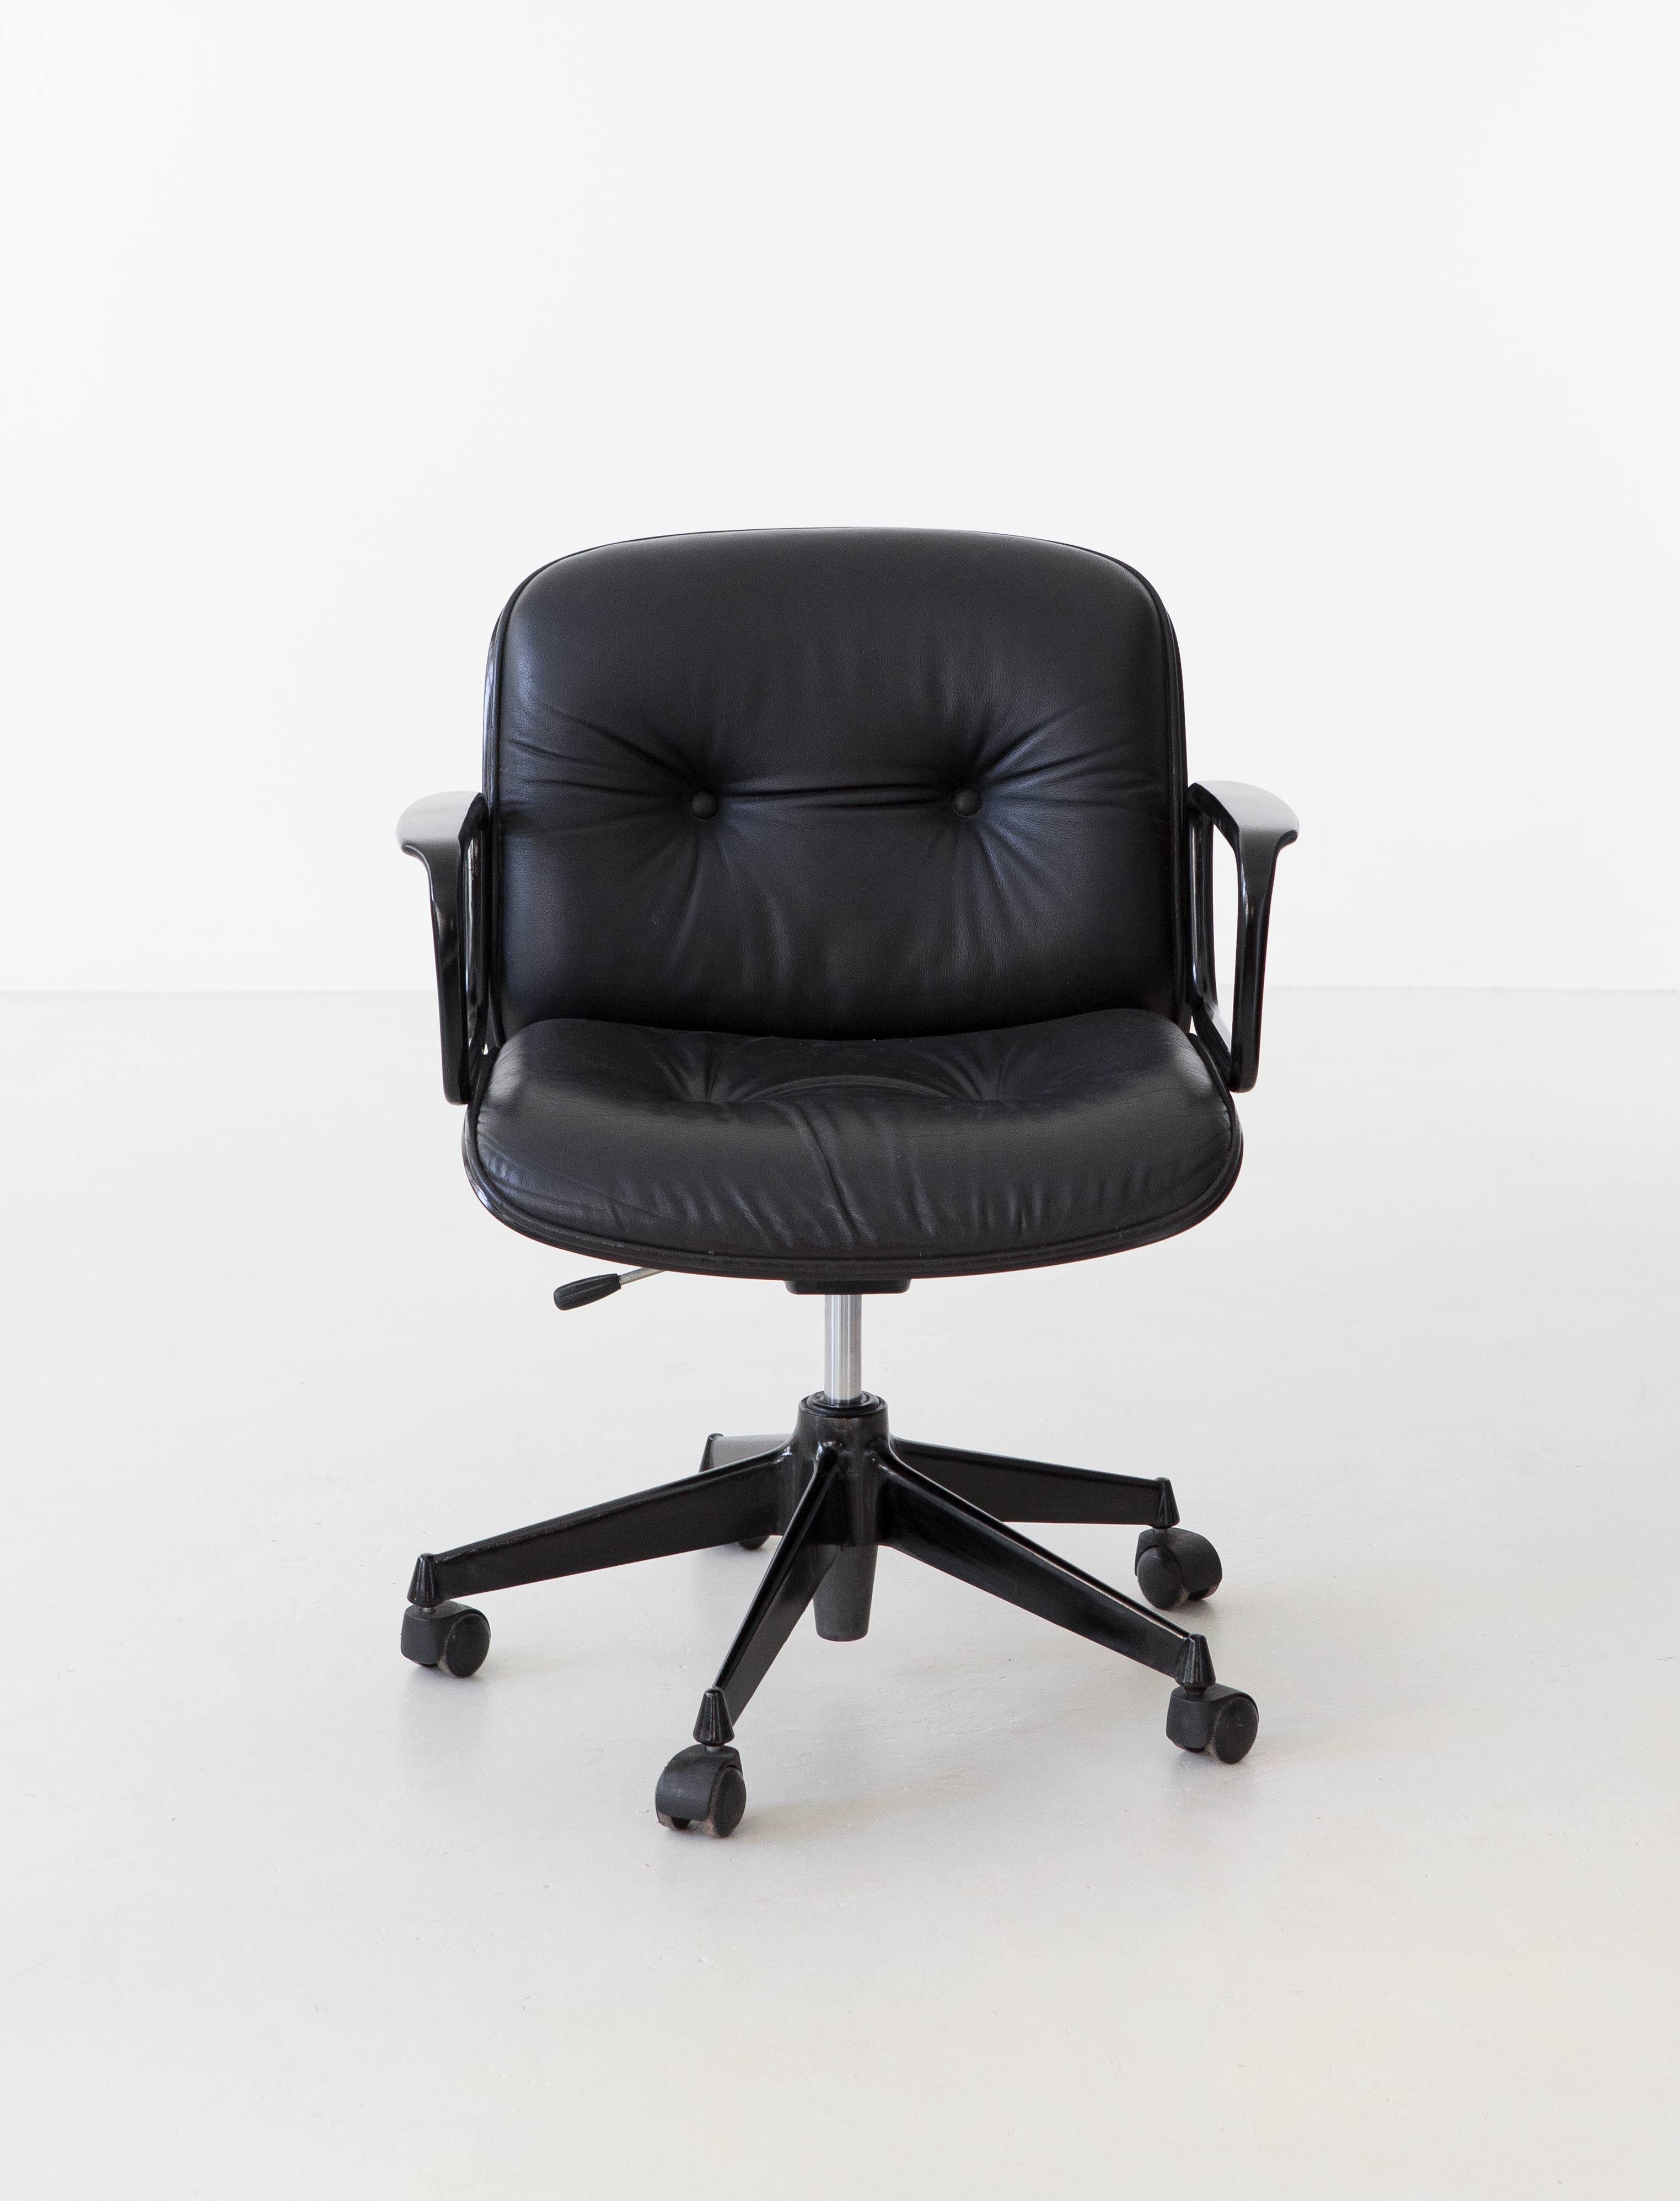 Office swivel chair with armrests designed by Ico Parisi and produced by M.I.M. (Mobili Italiani Moderni) Roma, Italy, 1960s.

Curved wooden frame , metal legs and original genuine black leather.


Fully restored:
-Sanding and polishing by hand with